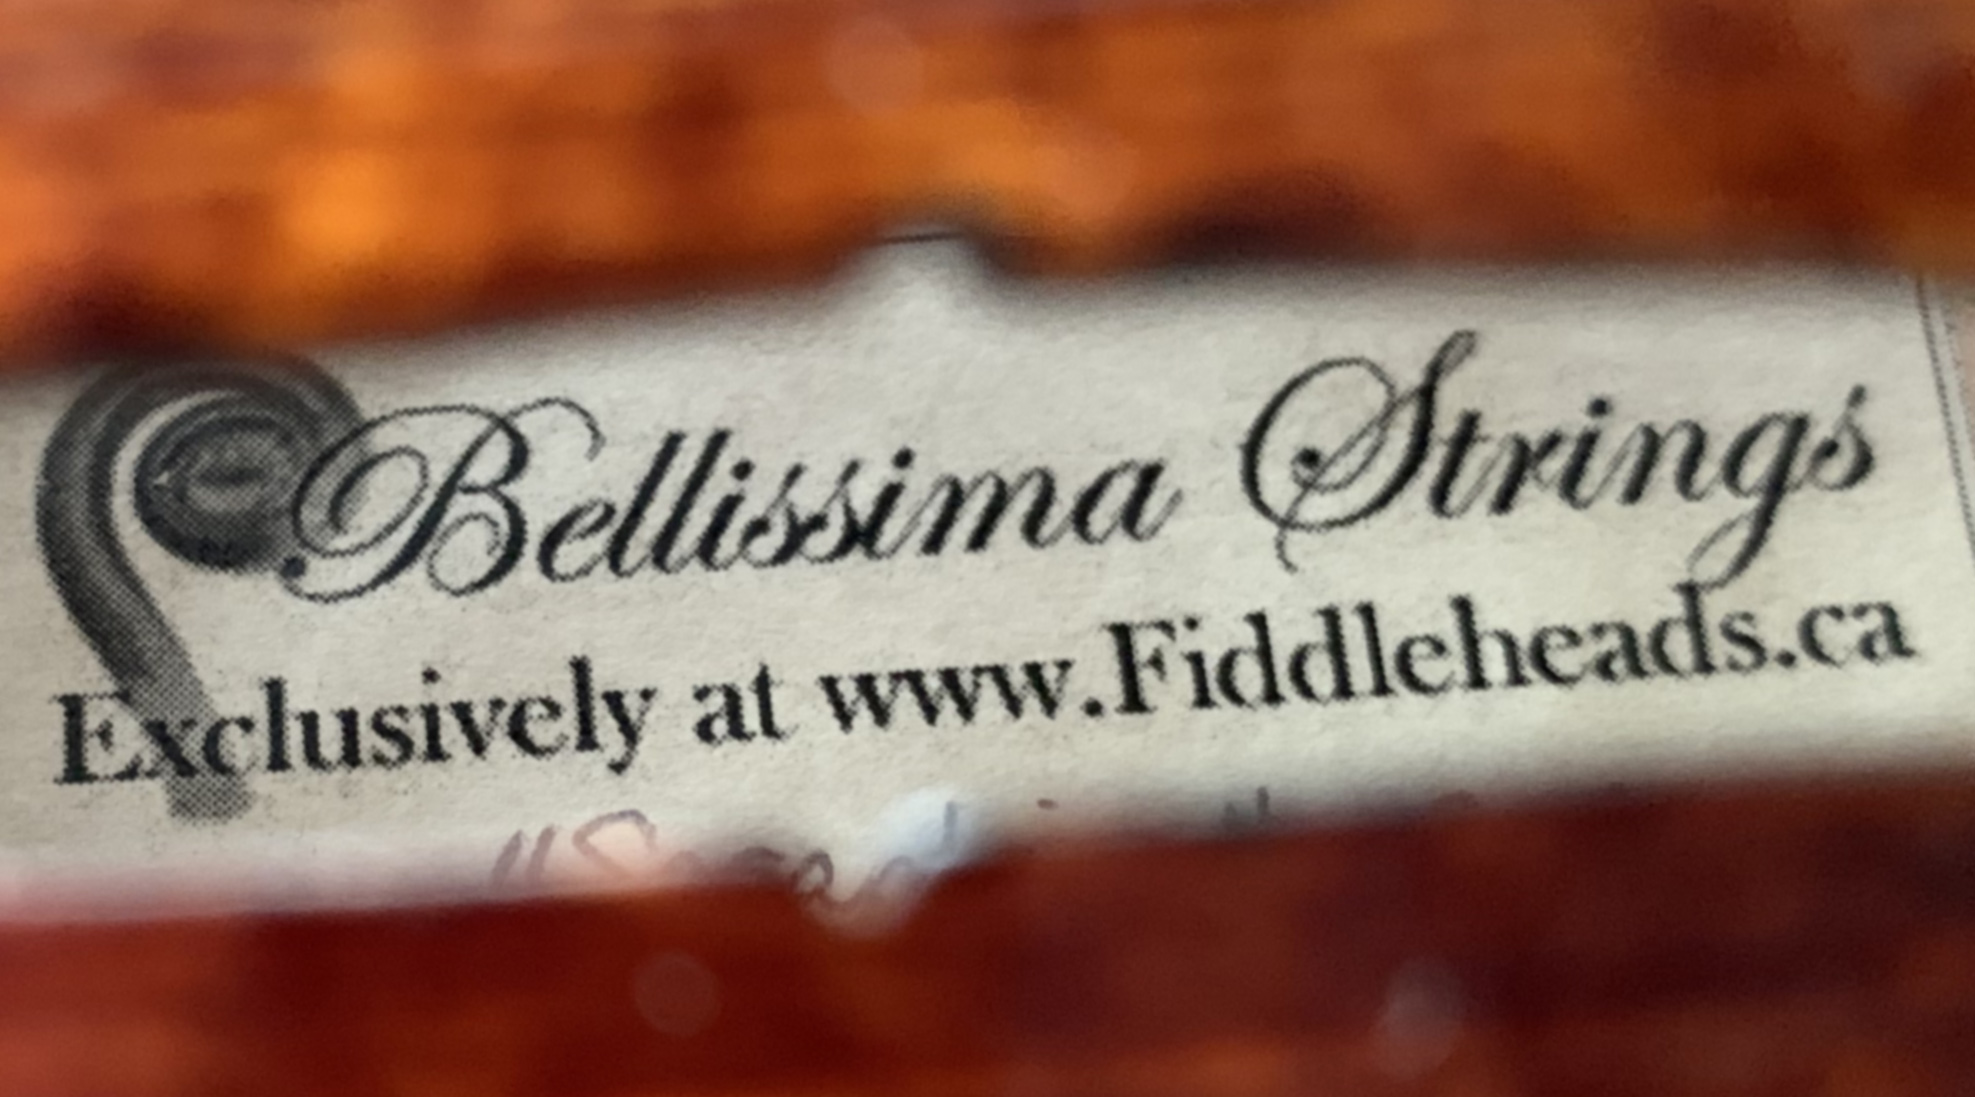 Bellissima - Fiddleheads Exclusive